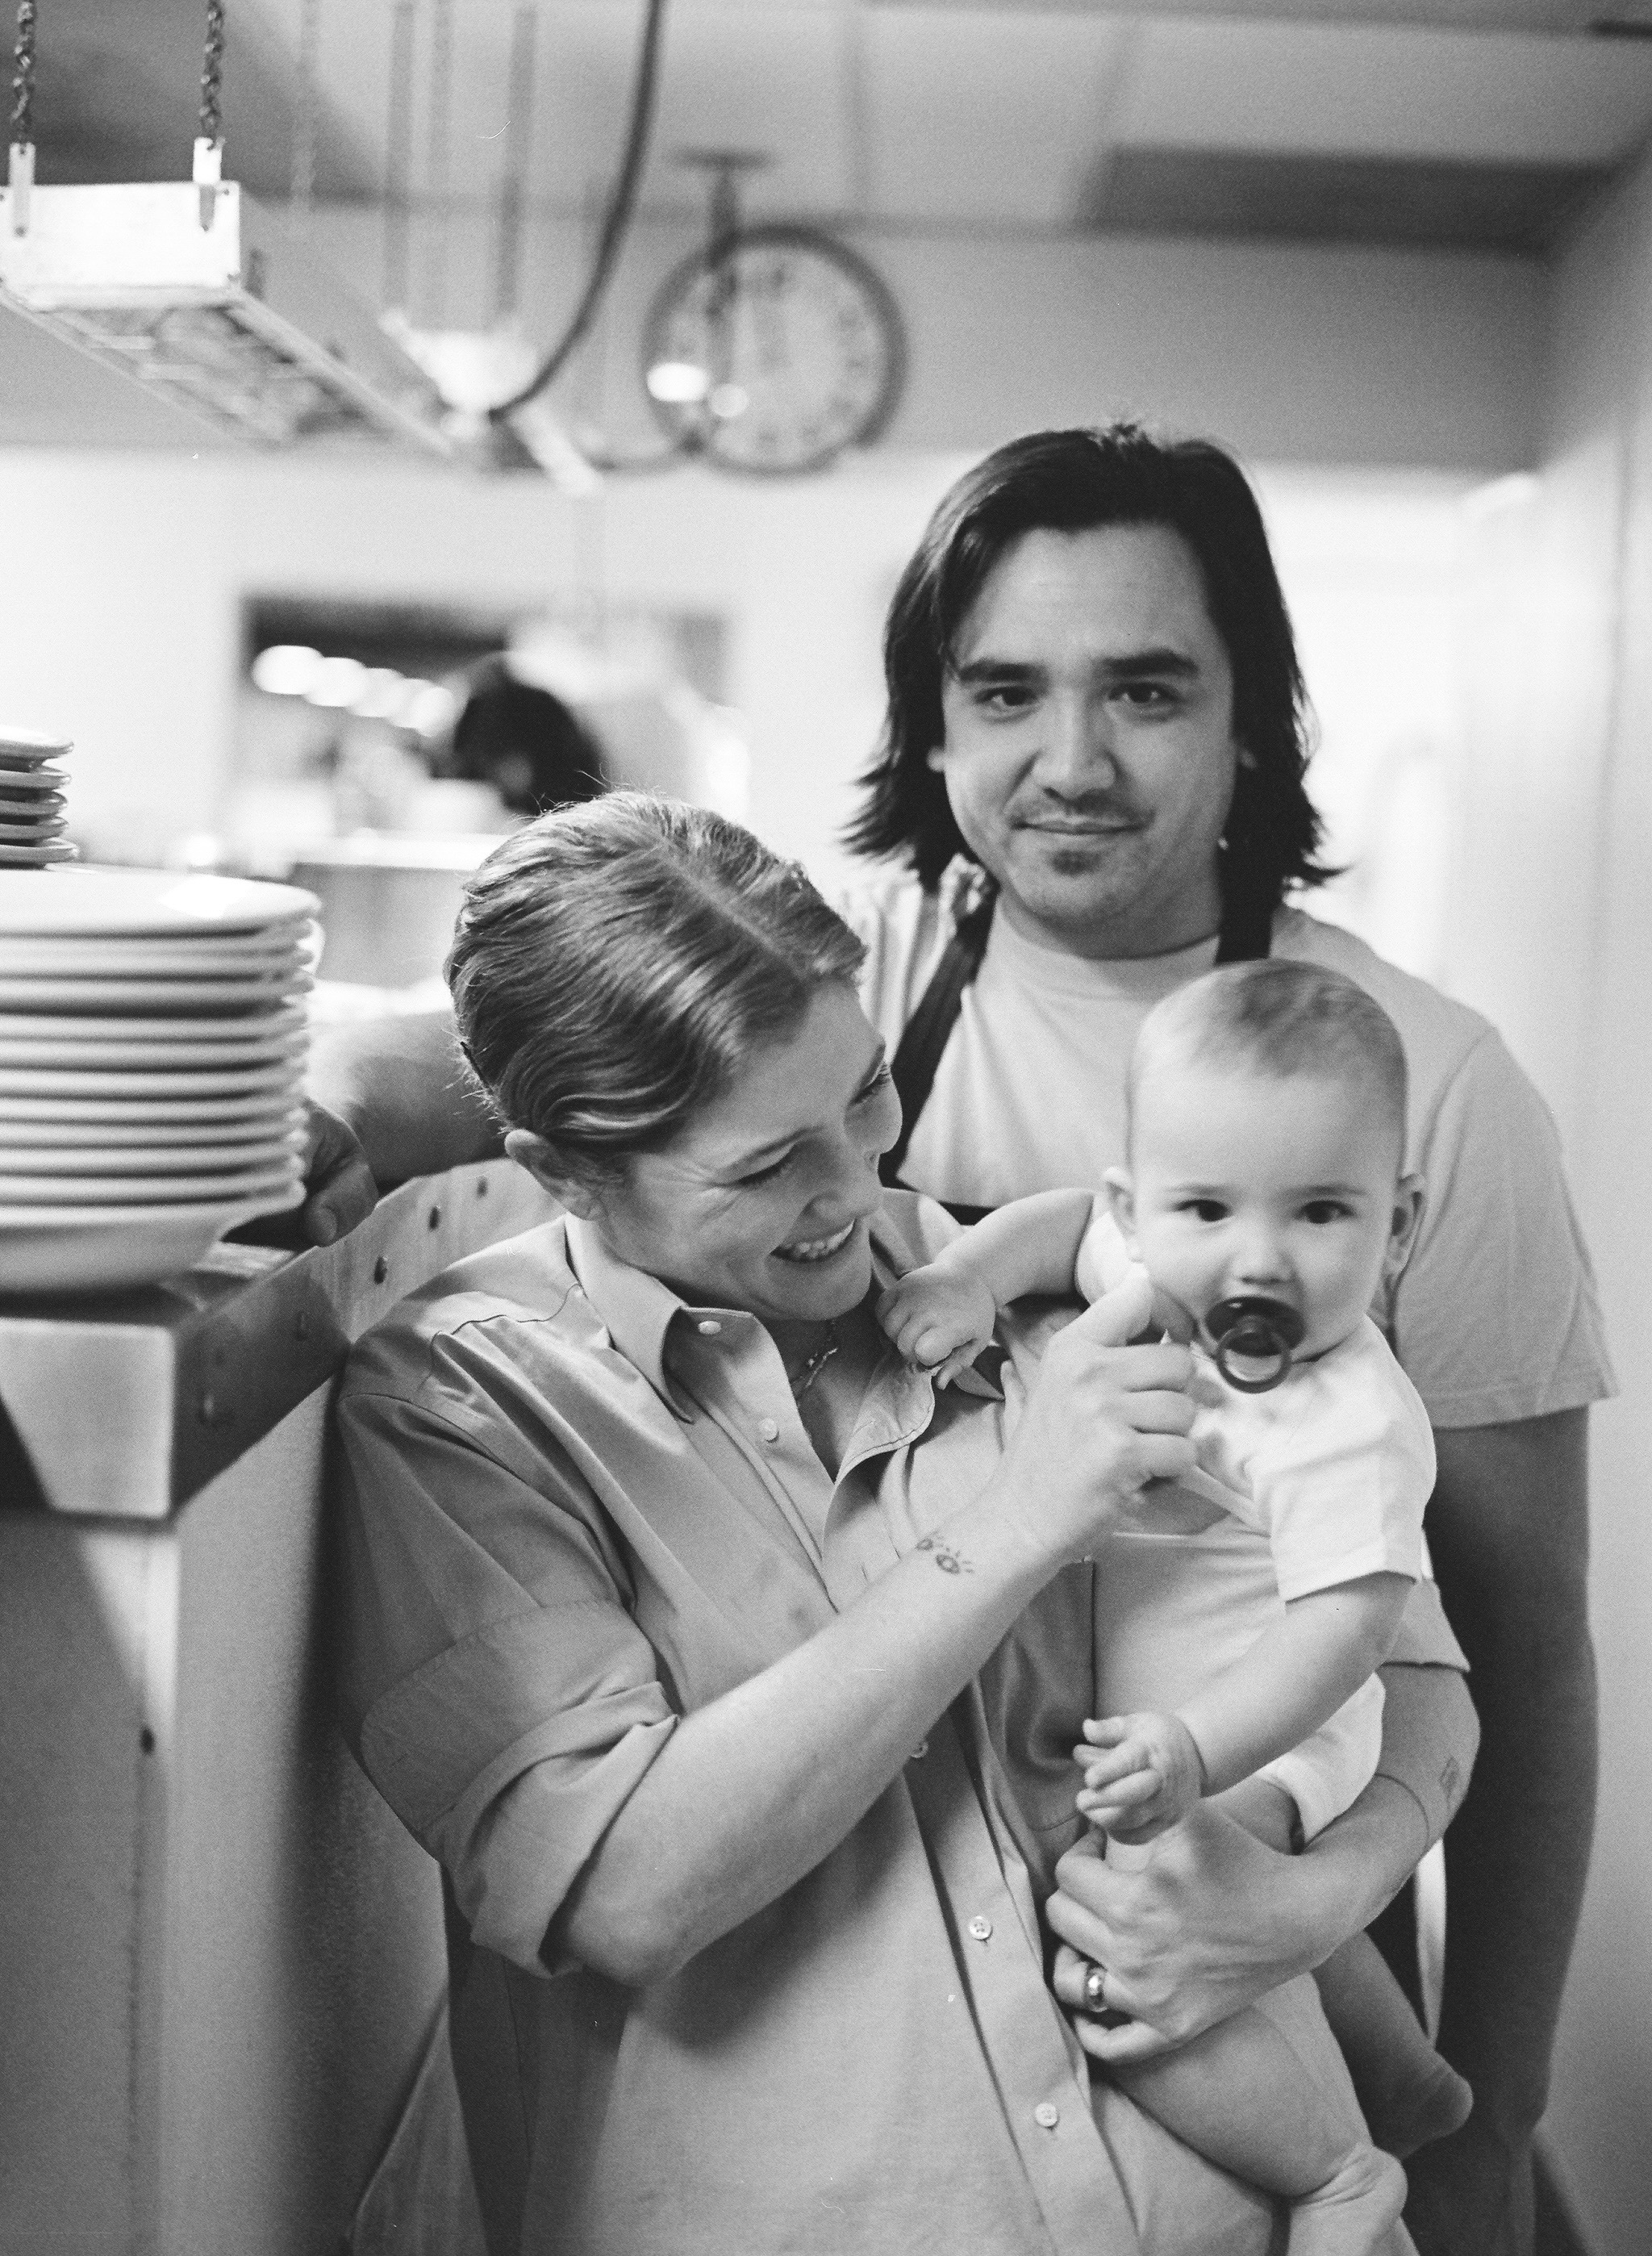 A woman with blonde curly hair holding a baby and a man with shoulder-length dark hair wearing an apron stand in a restaurant kitchen. 